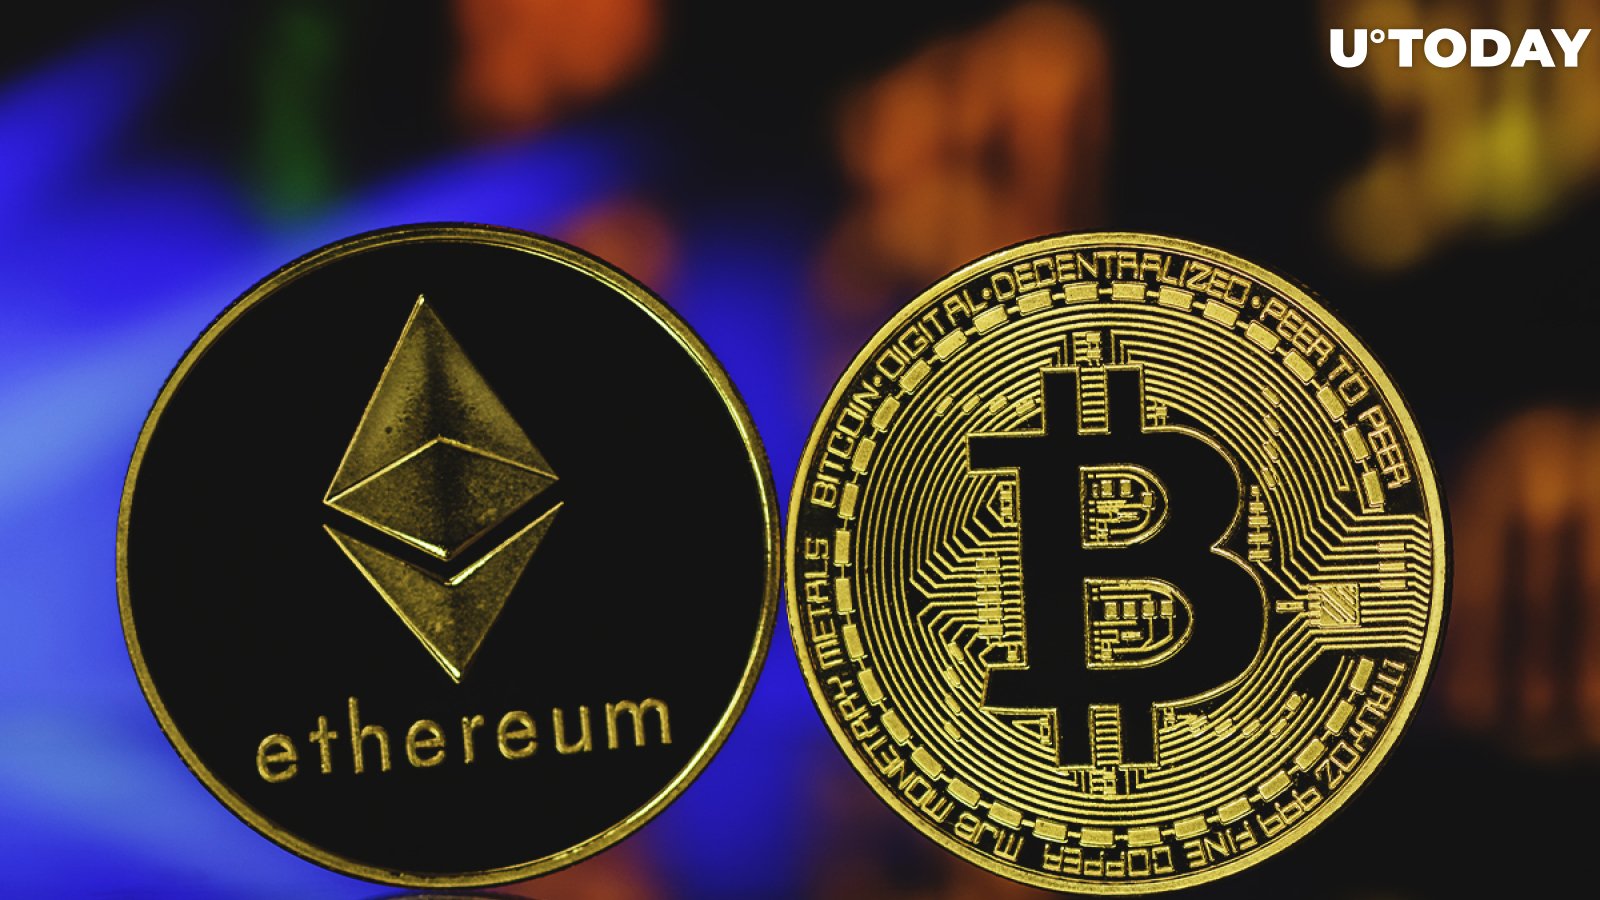 Ethereum Sentiment Drops Against Bitcoin on Twitter as BTC Is Viewed as Safe Haven: Santiment